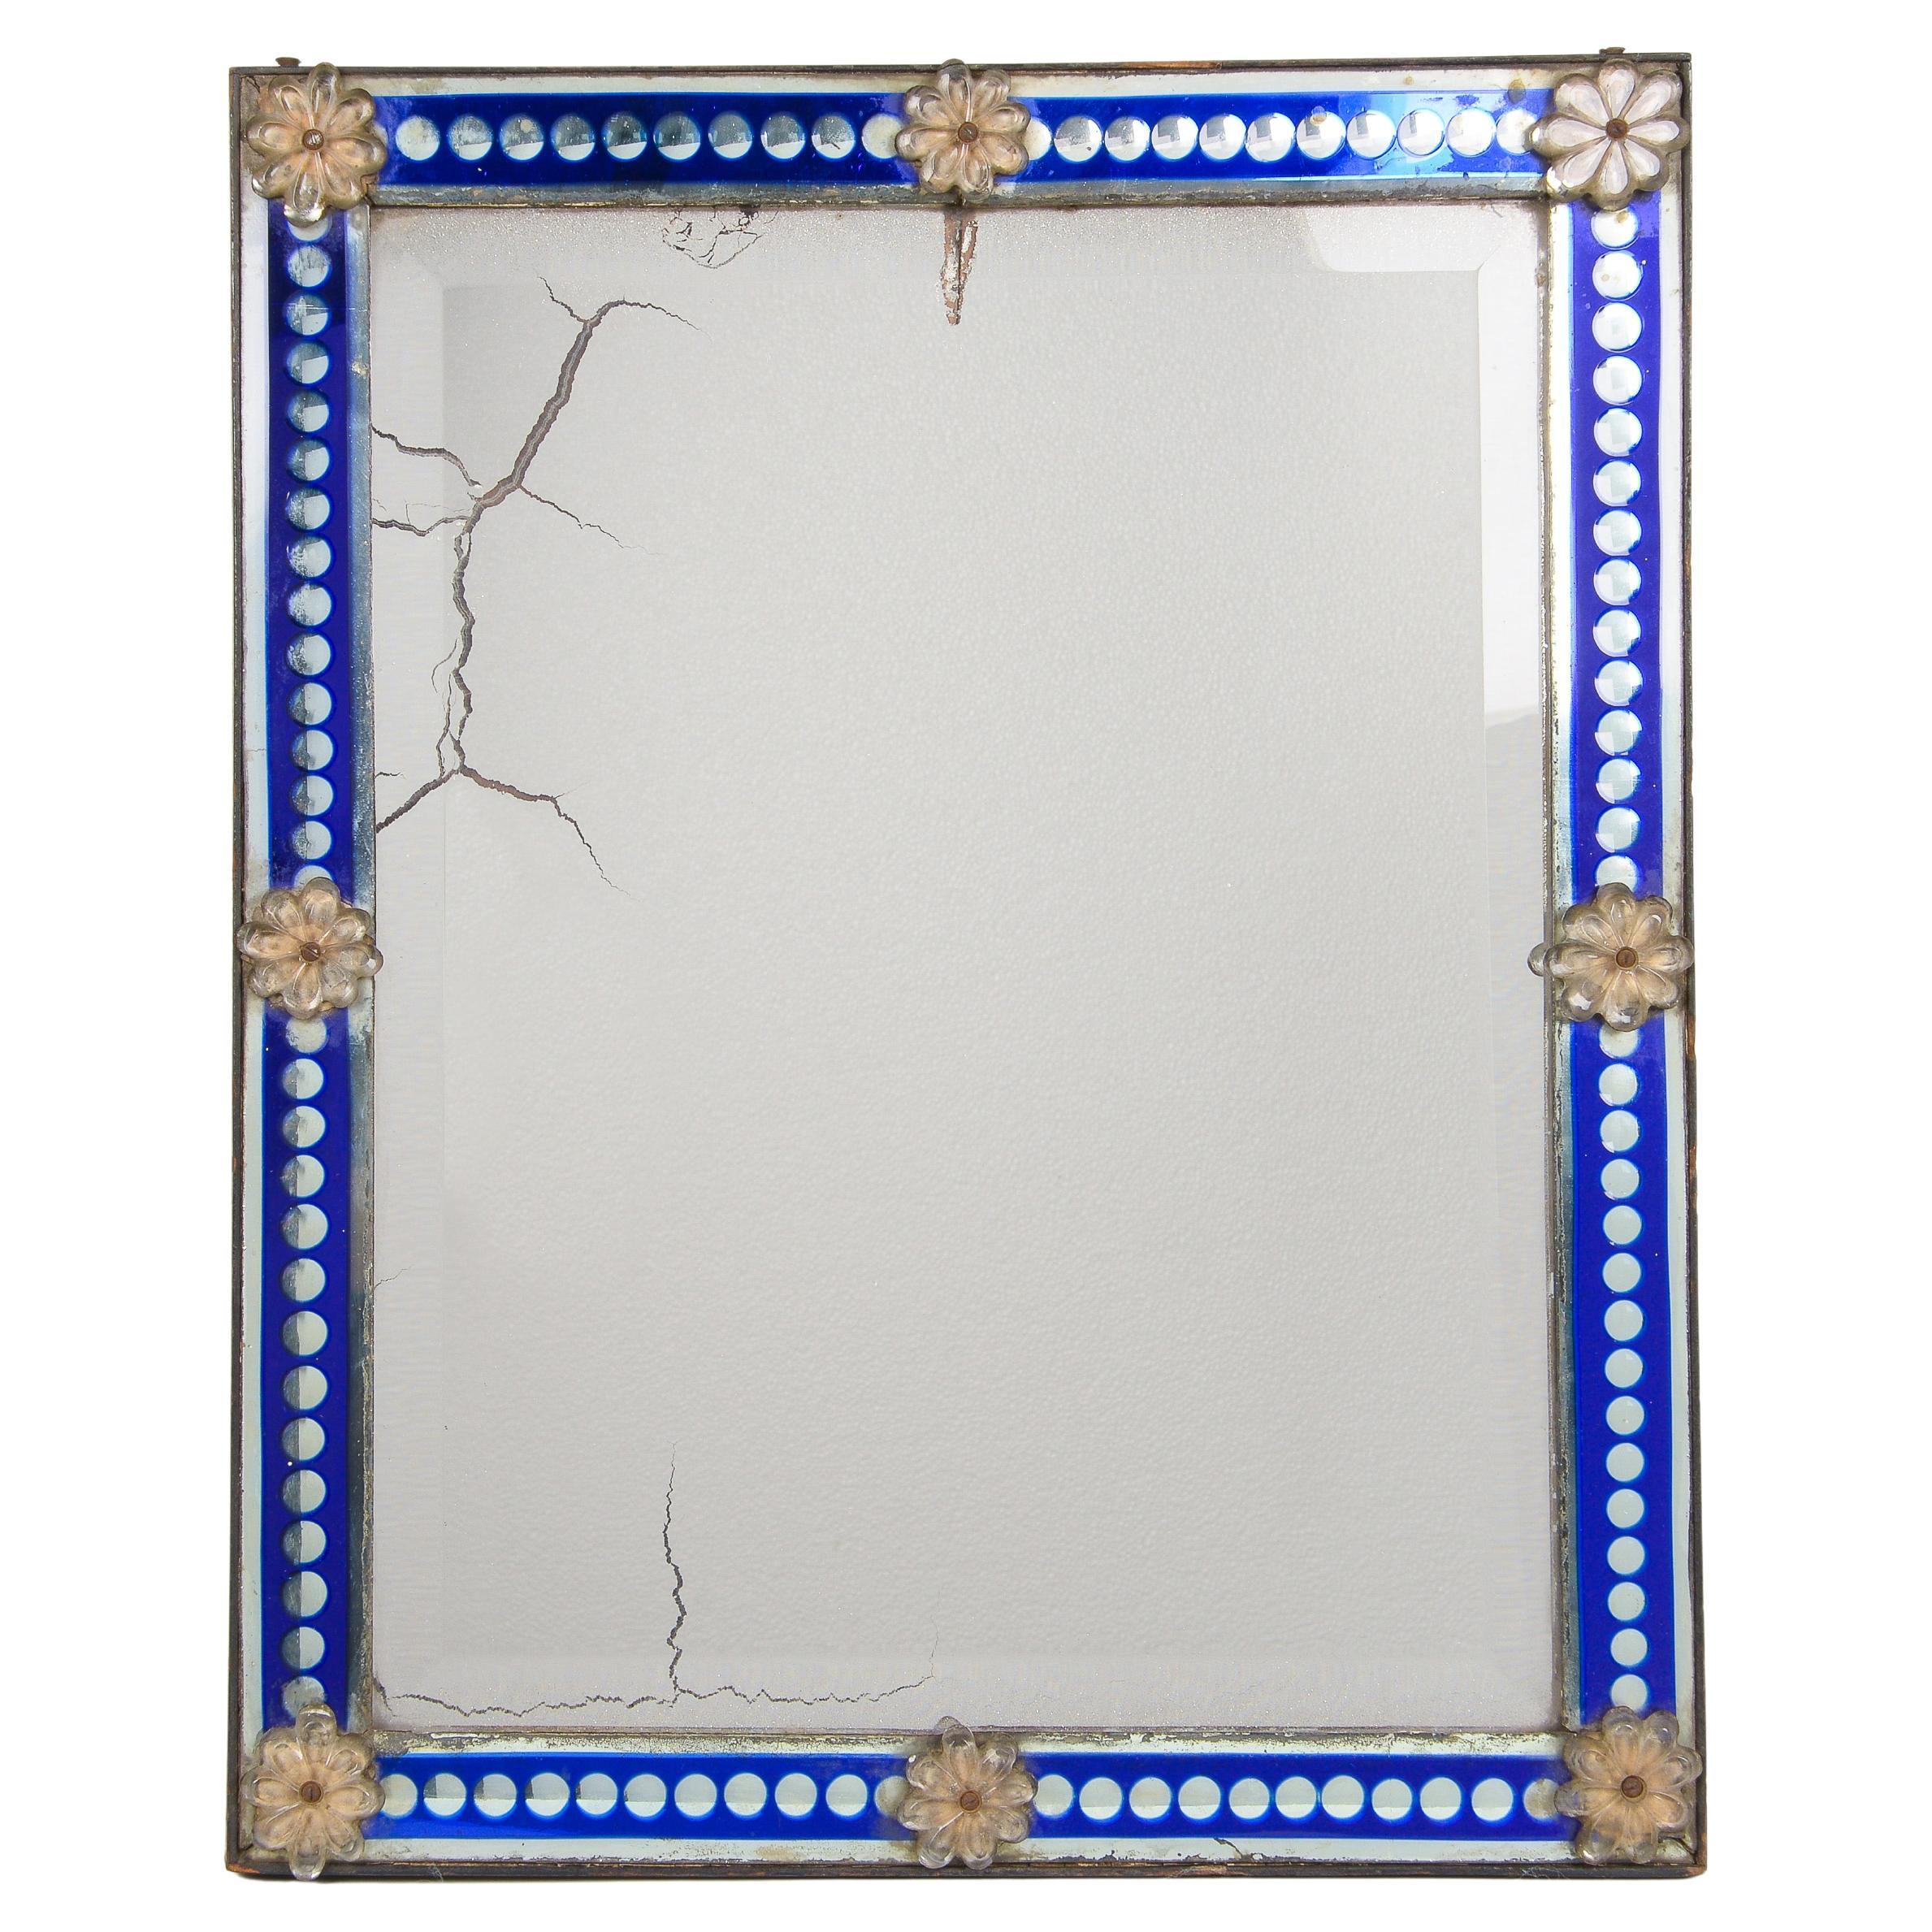 Napoleon III Cobalt and Clear Glass Table Mirror